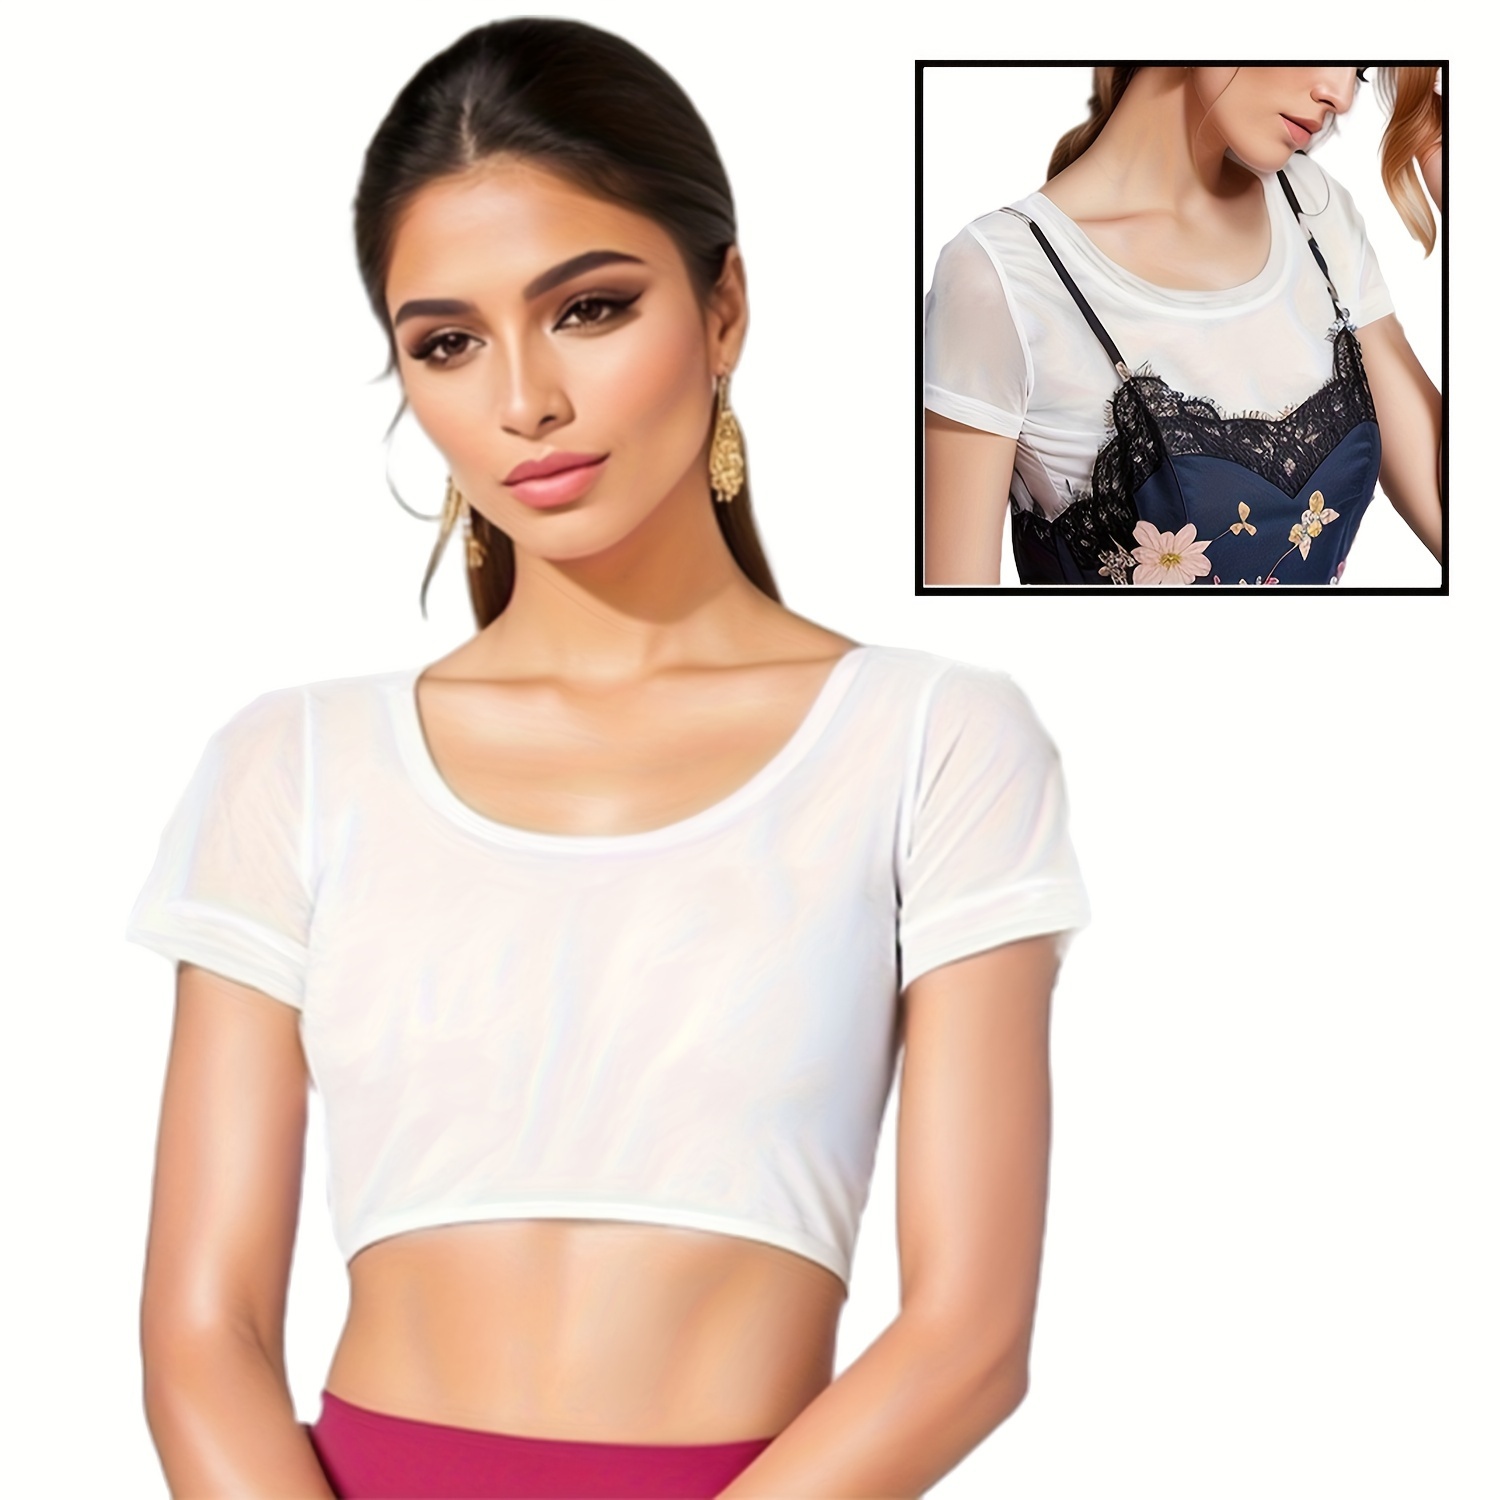 

1pc Women's Sheer Mesh Crop Top With Anti-light Feature, Short Sleeve, Versatile Layering Cami Dress, Dual Front And Single Rear Elastic Lace Panel, Multi-wear Style Blouse